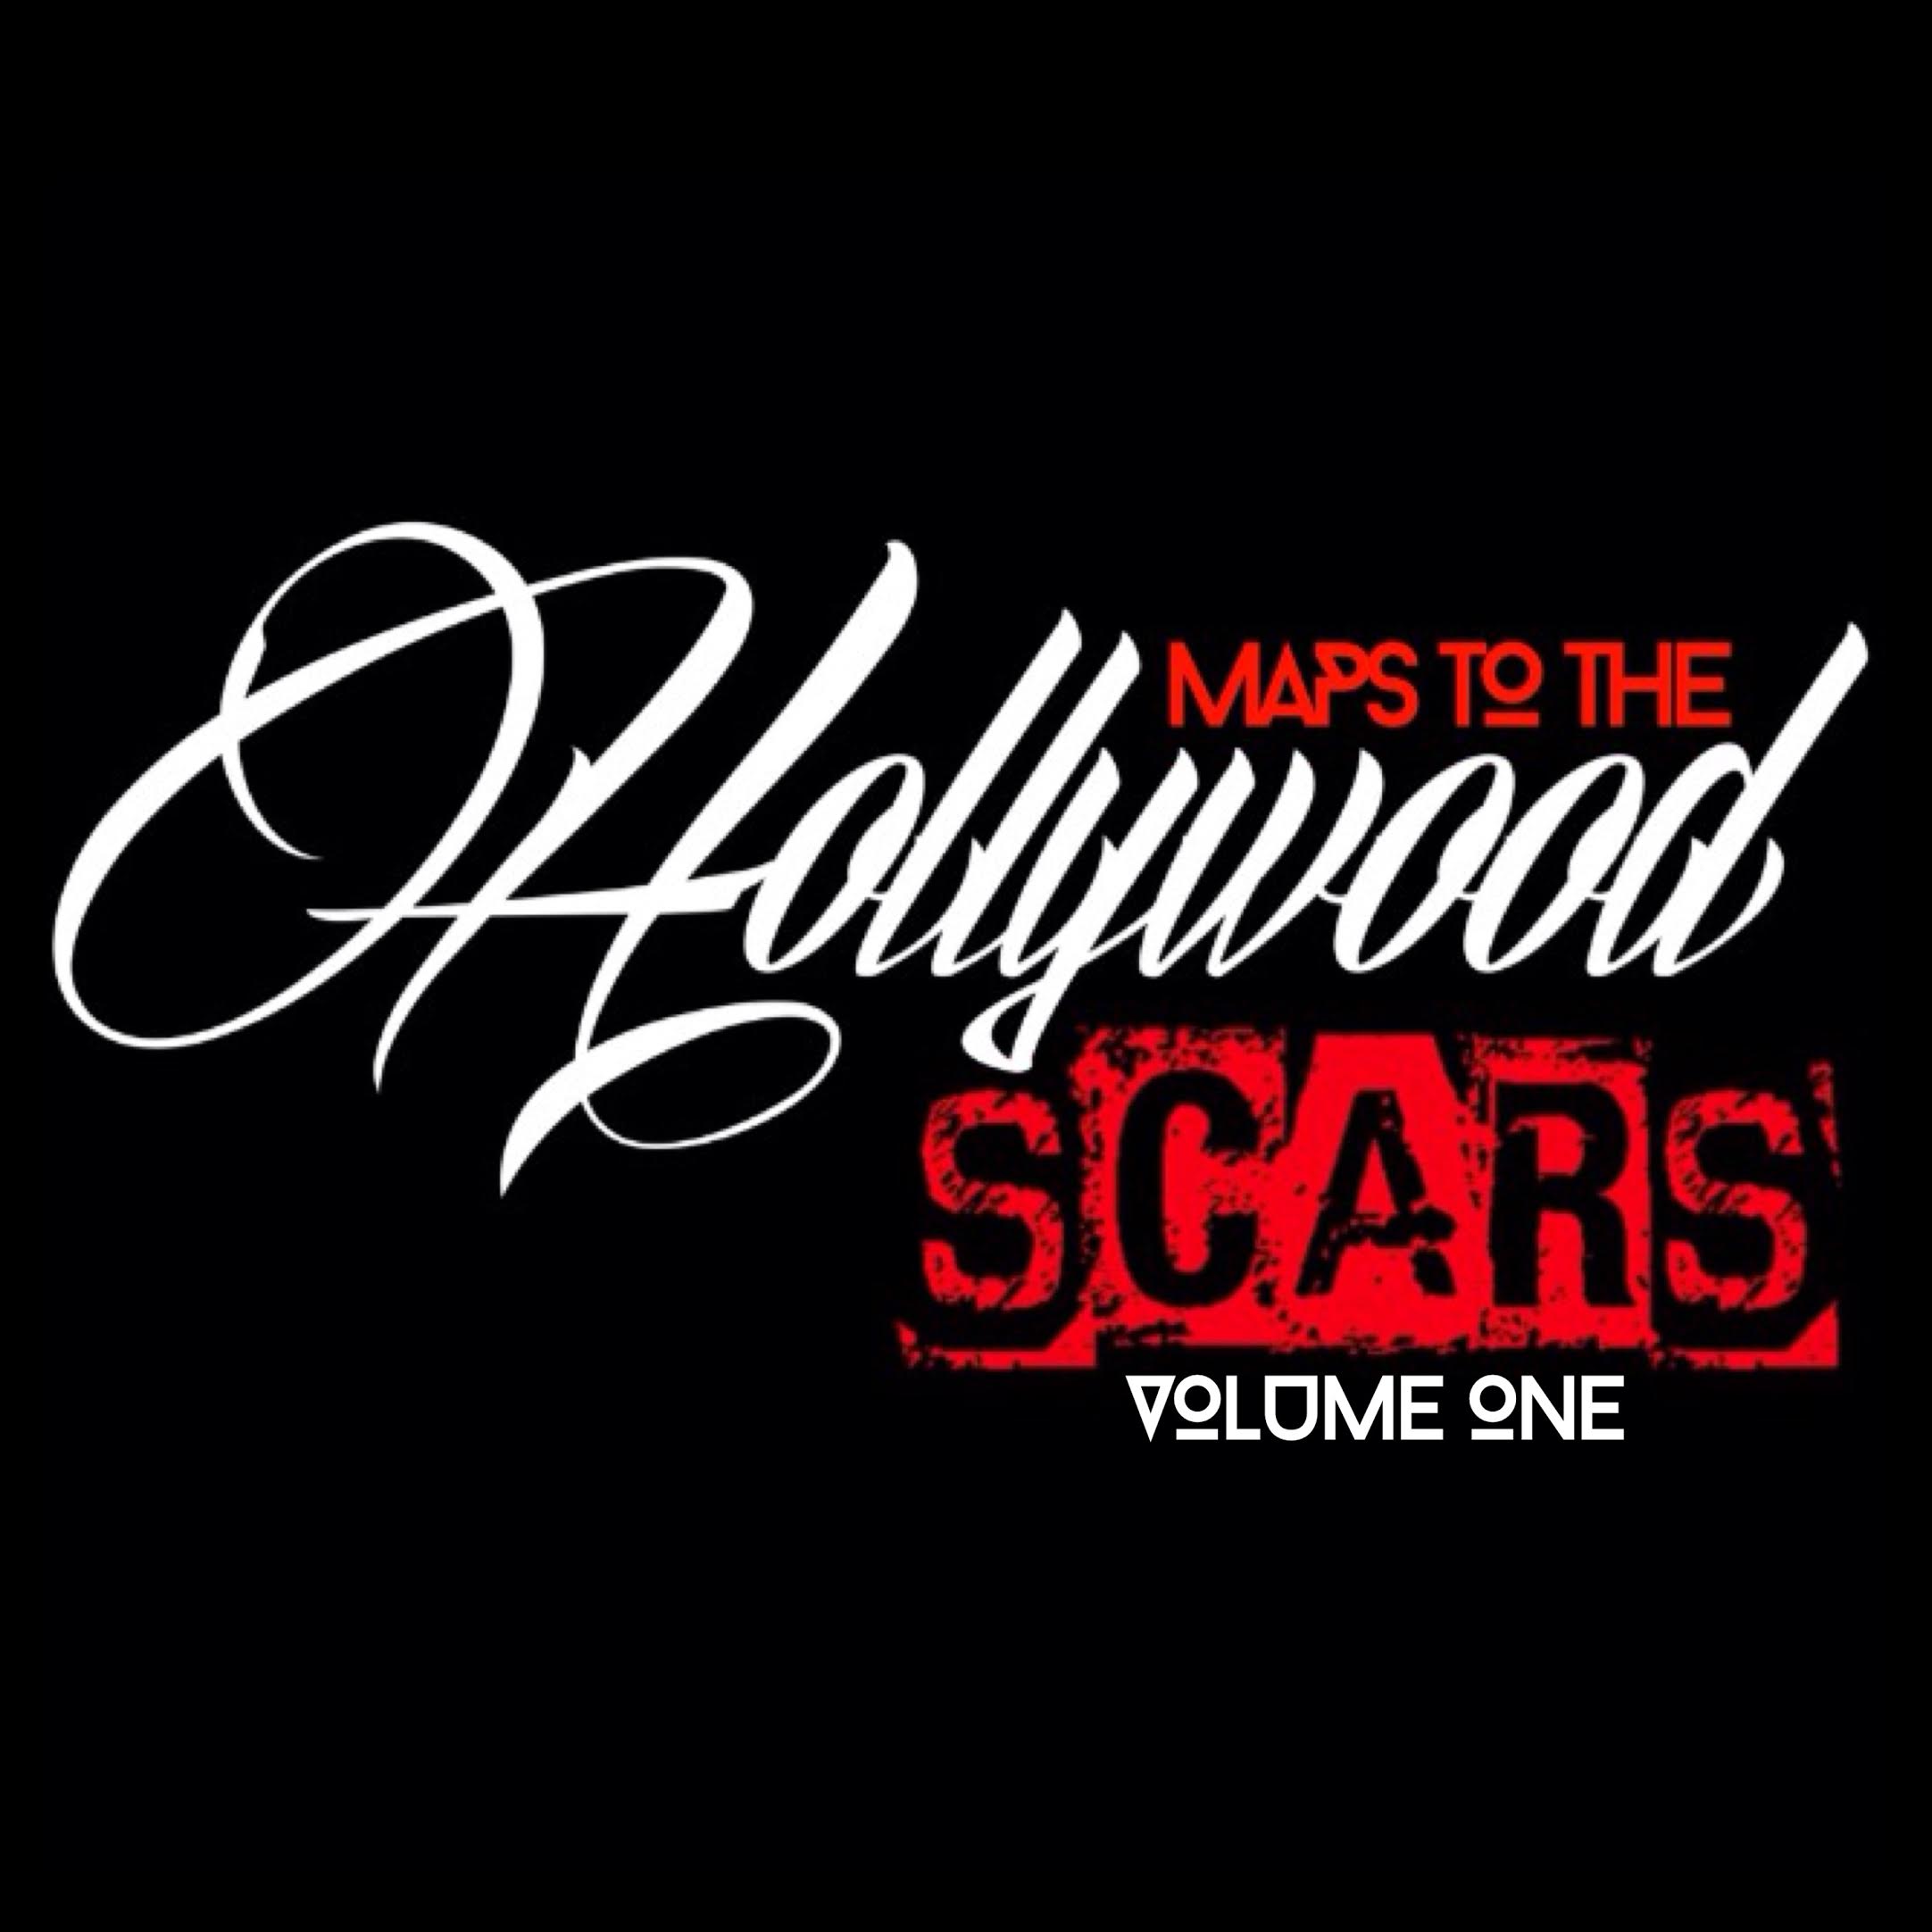 Maps To The Hollywood Scars_Cover